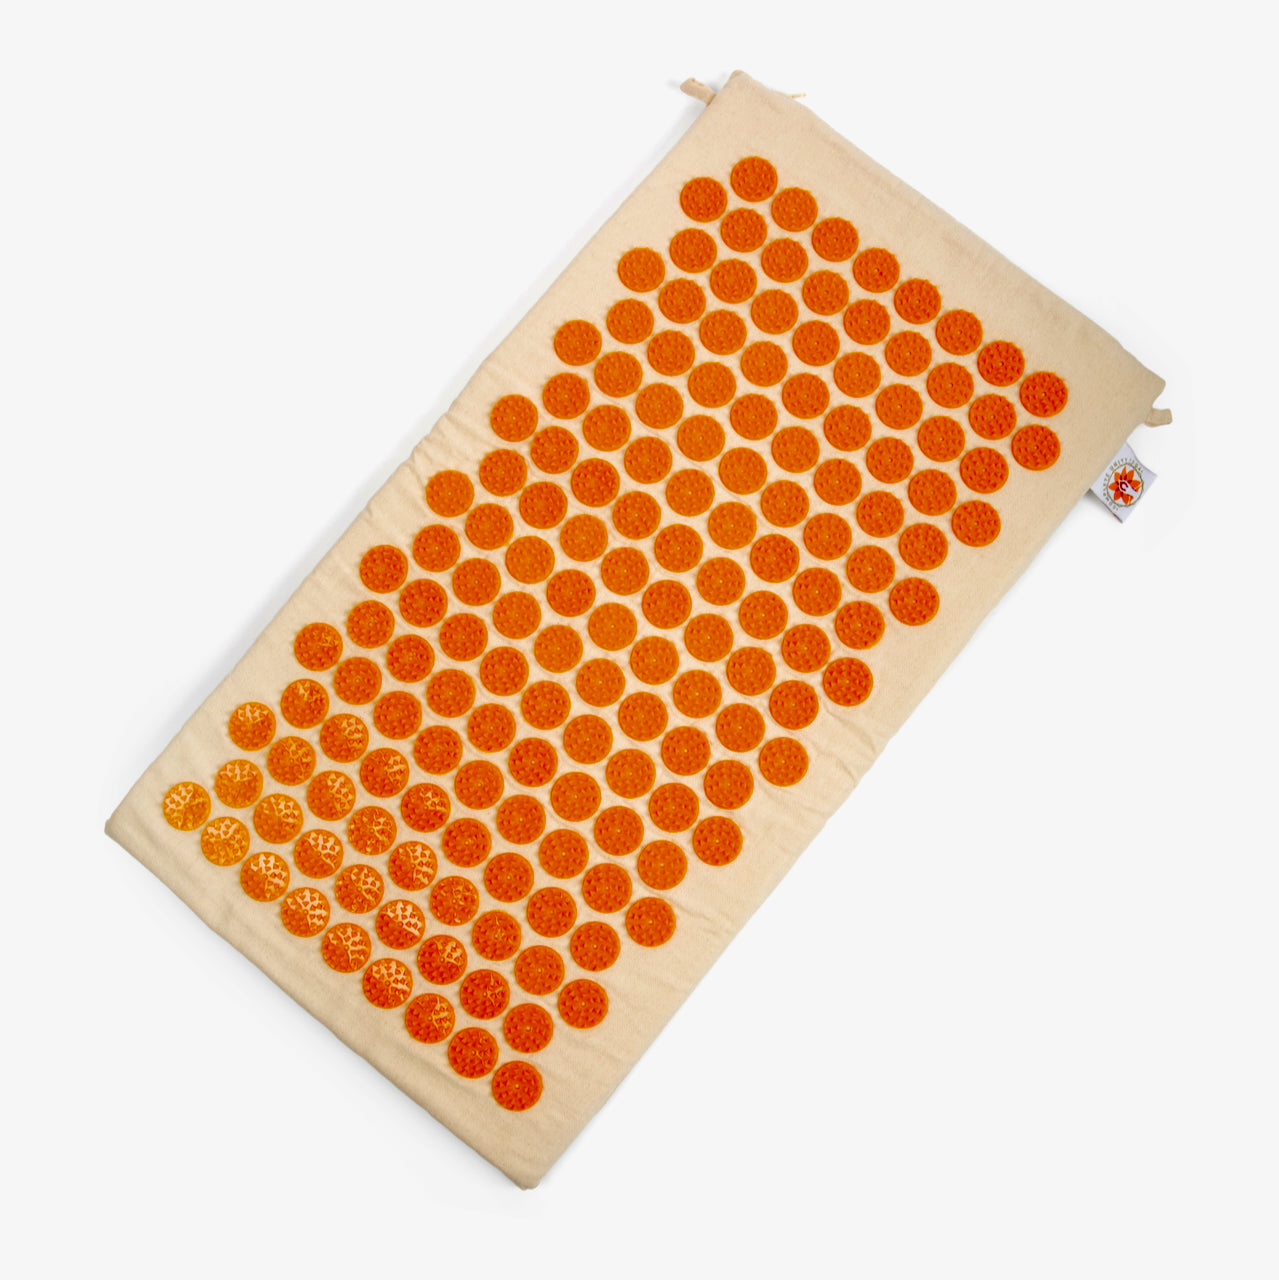 NEW - RelaxFast™ Lite Acupressure Mat - AllTrue Subscription Box - Arial Product Image